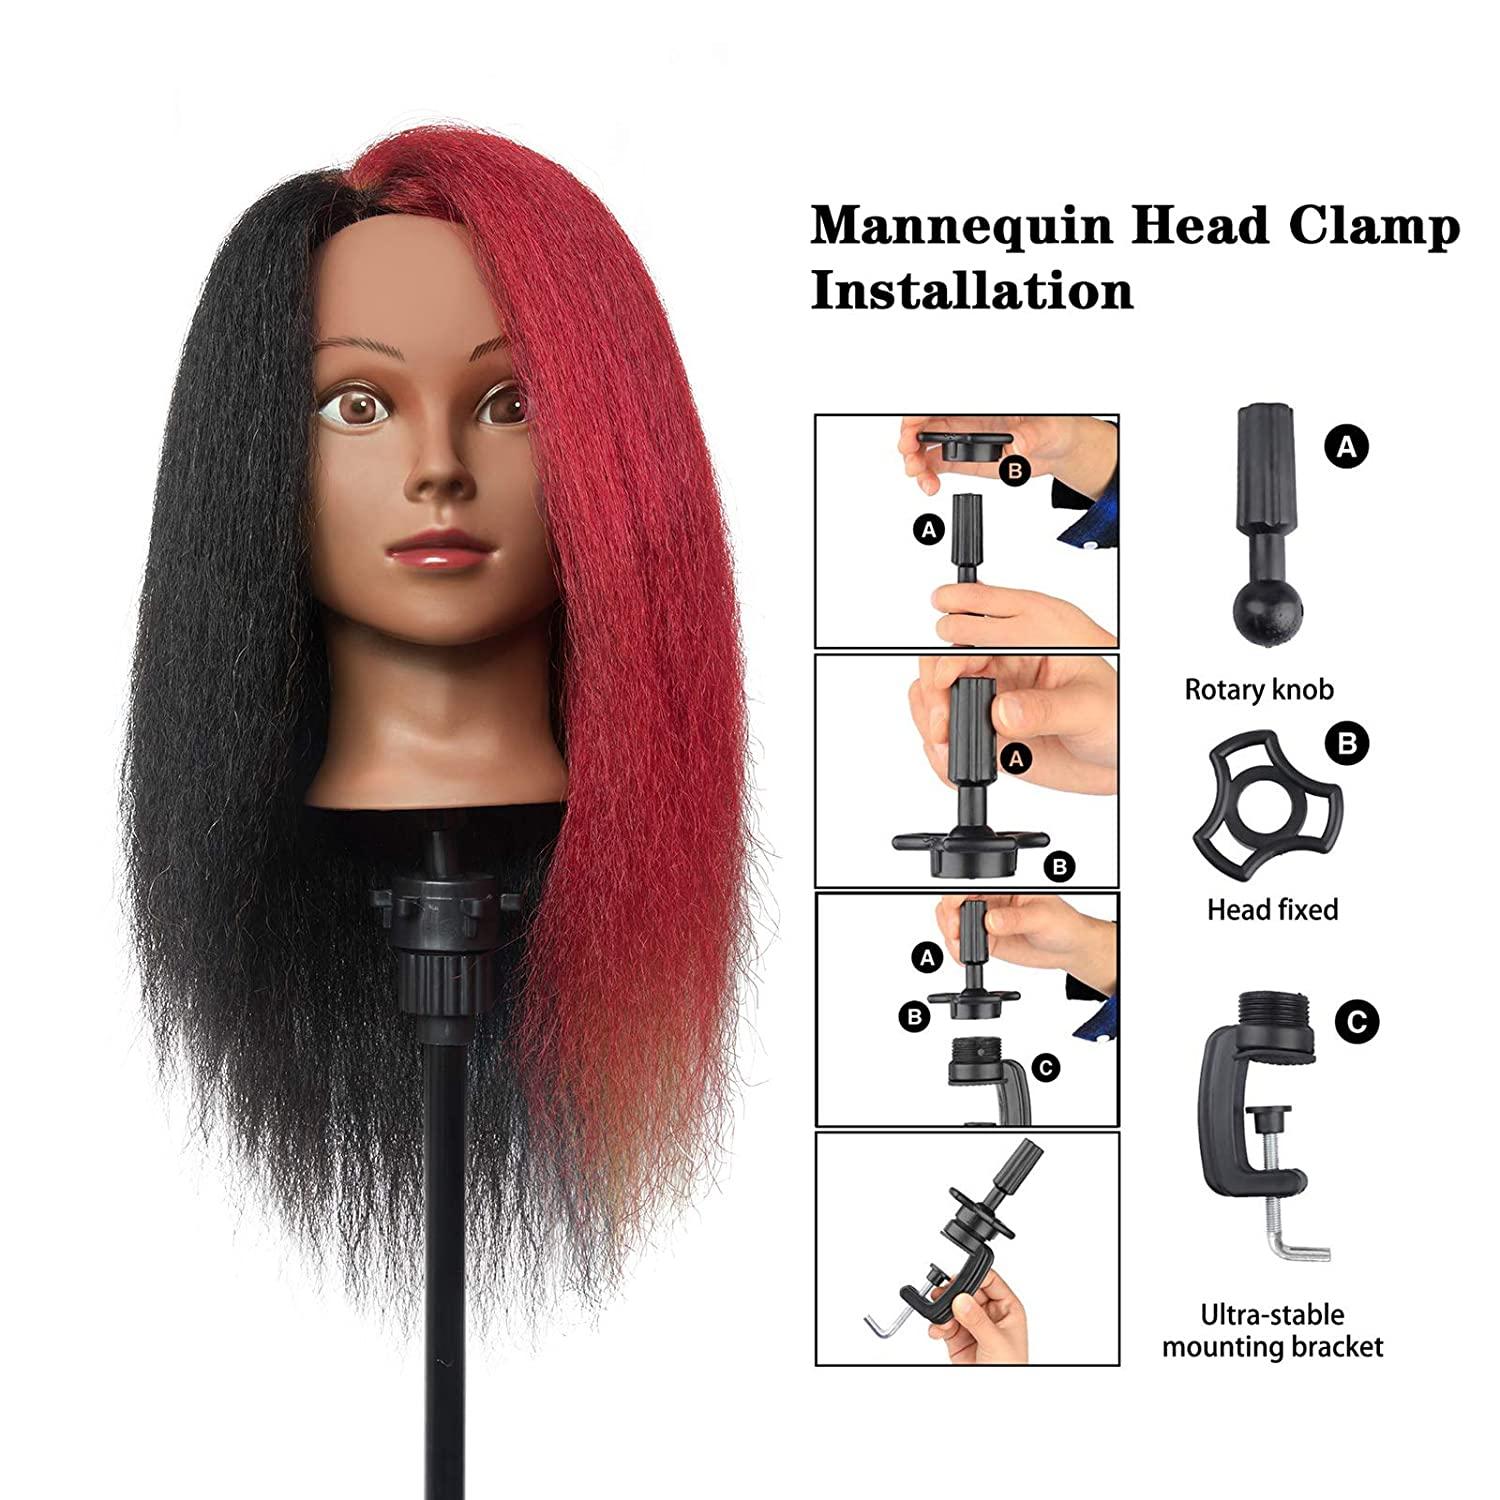 Female Mannequin Head With Hair For Braiding African Mannequin Practice  Hairdressing Training Head Dummy Head For Cosmetology - AliExpress